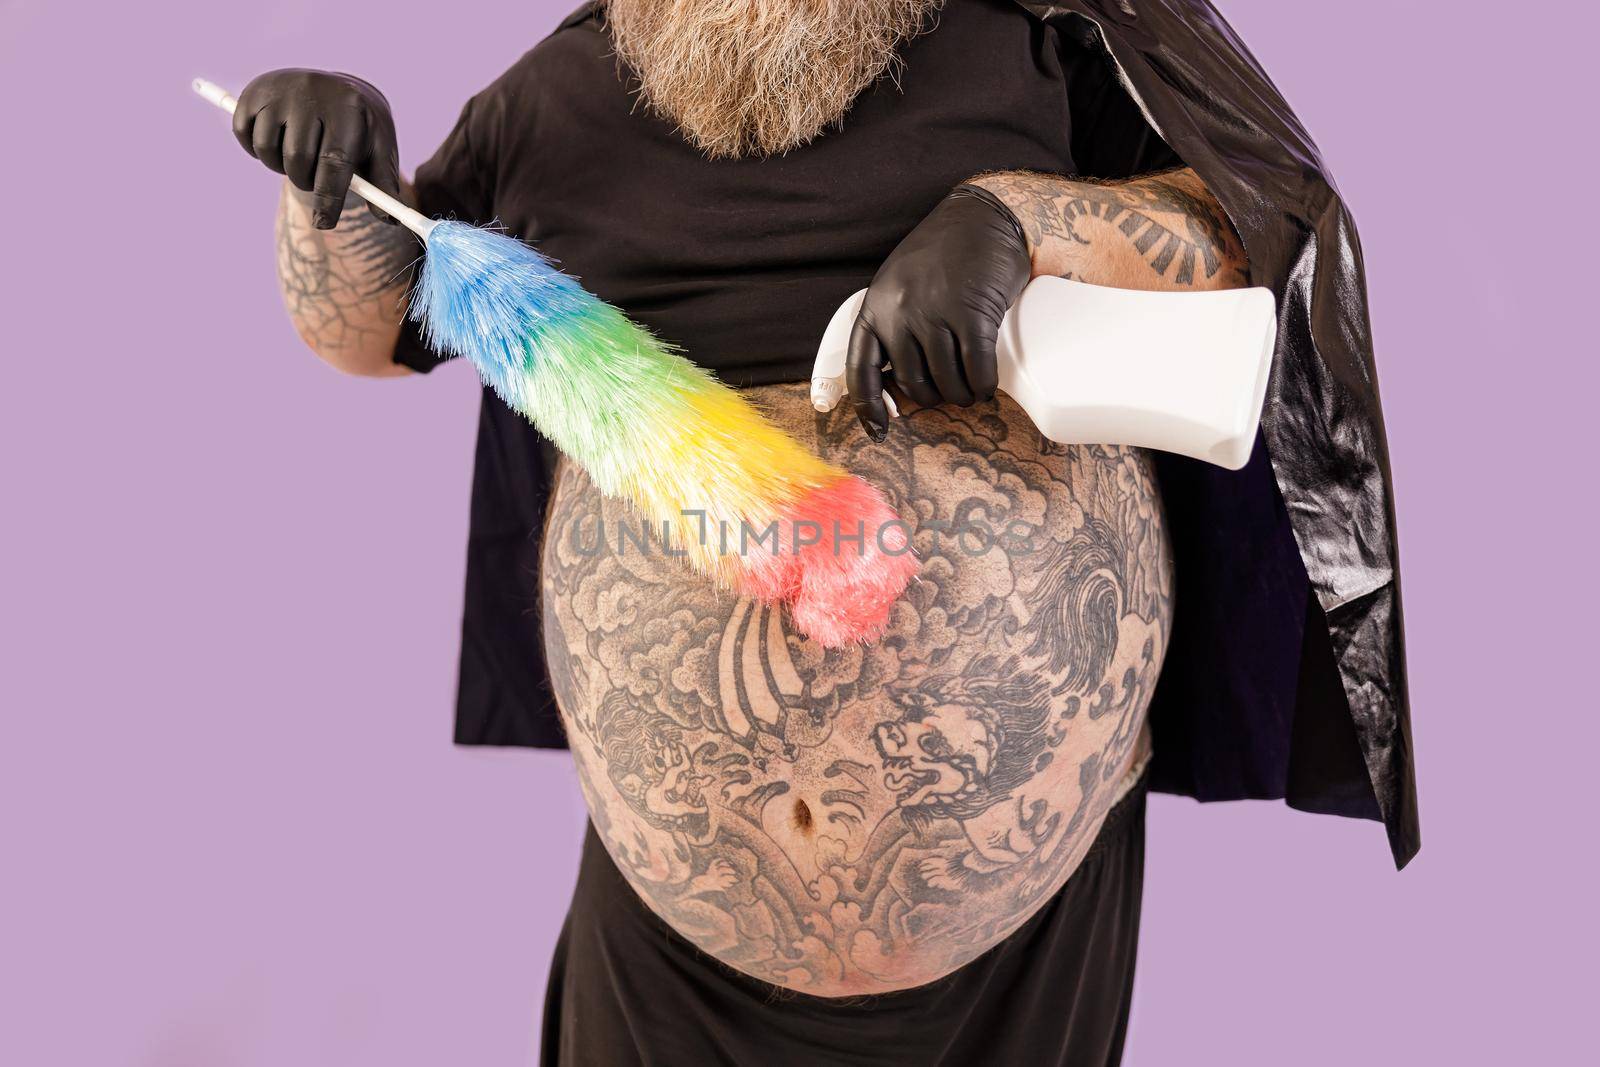 Fat man in hero suit with large bare tattooed tummy sprays detergent onto colorful brush from bottle on purple background in studio closeup